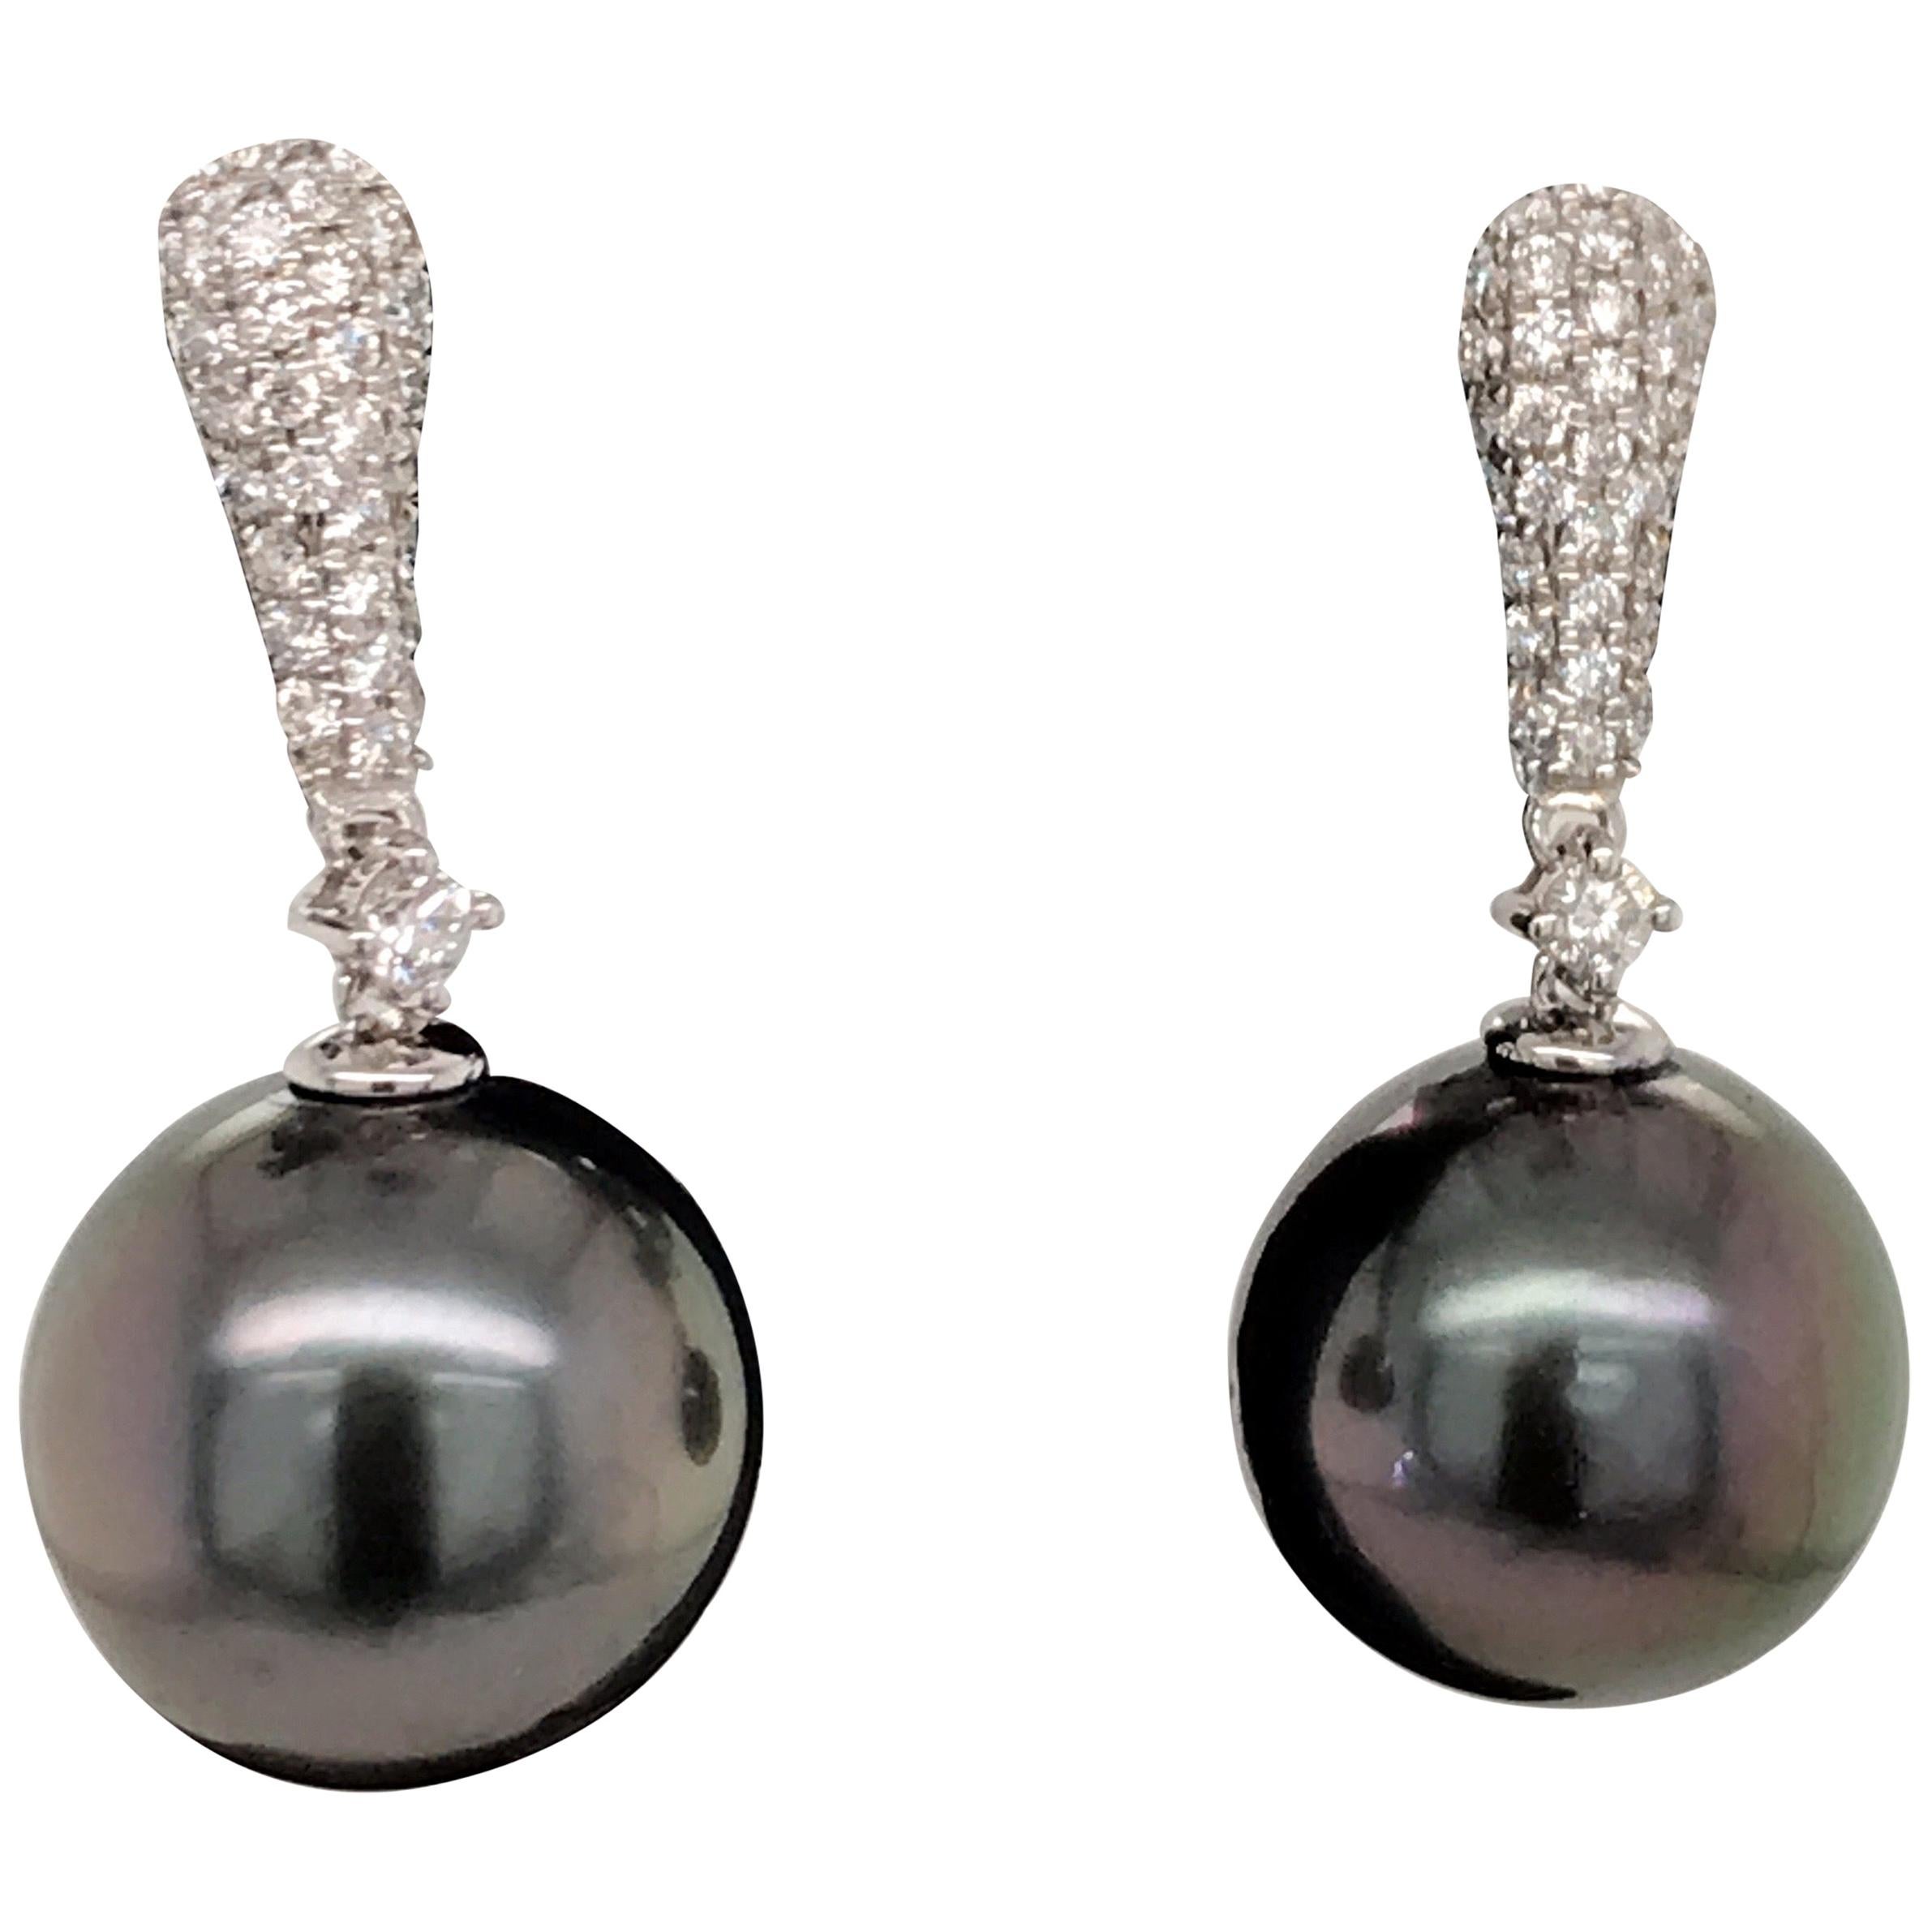 18K White gold drop earrings featuring two Tahitian pearls measuring 11-12 MM flanked with 68 round brilliants weighing 0.37 carats.
Color G-H
Clarity SI